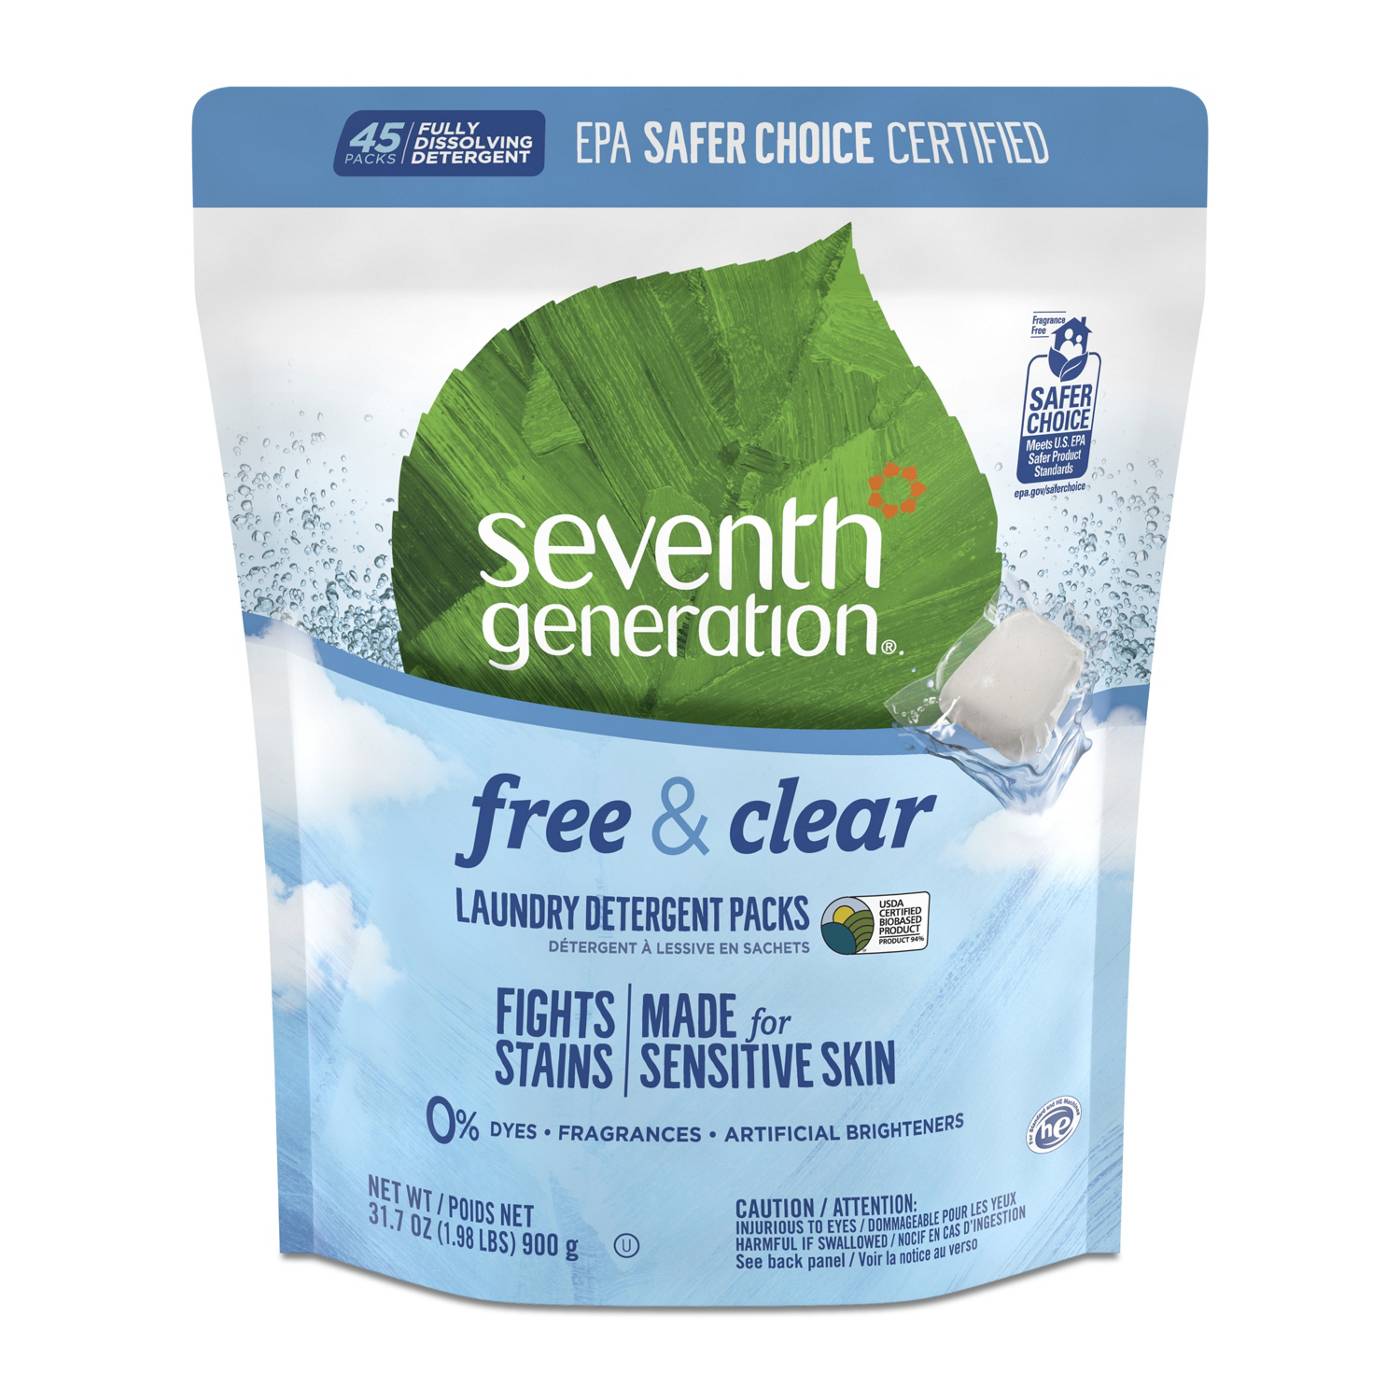 Seventh Generation Free & Clear HE Laundry Detergent Packs; image 1 of 6